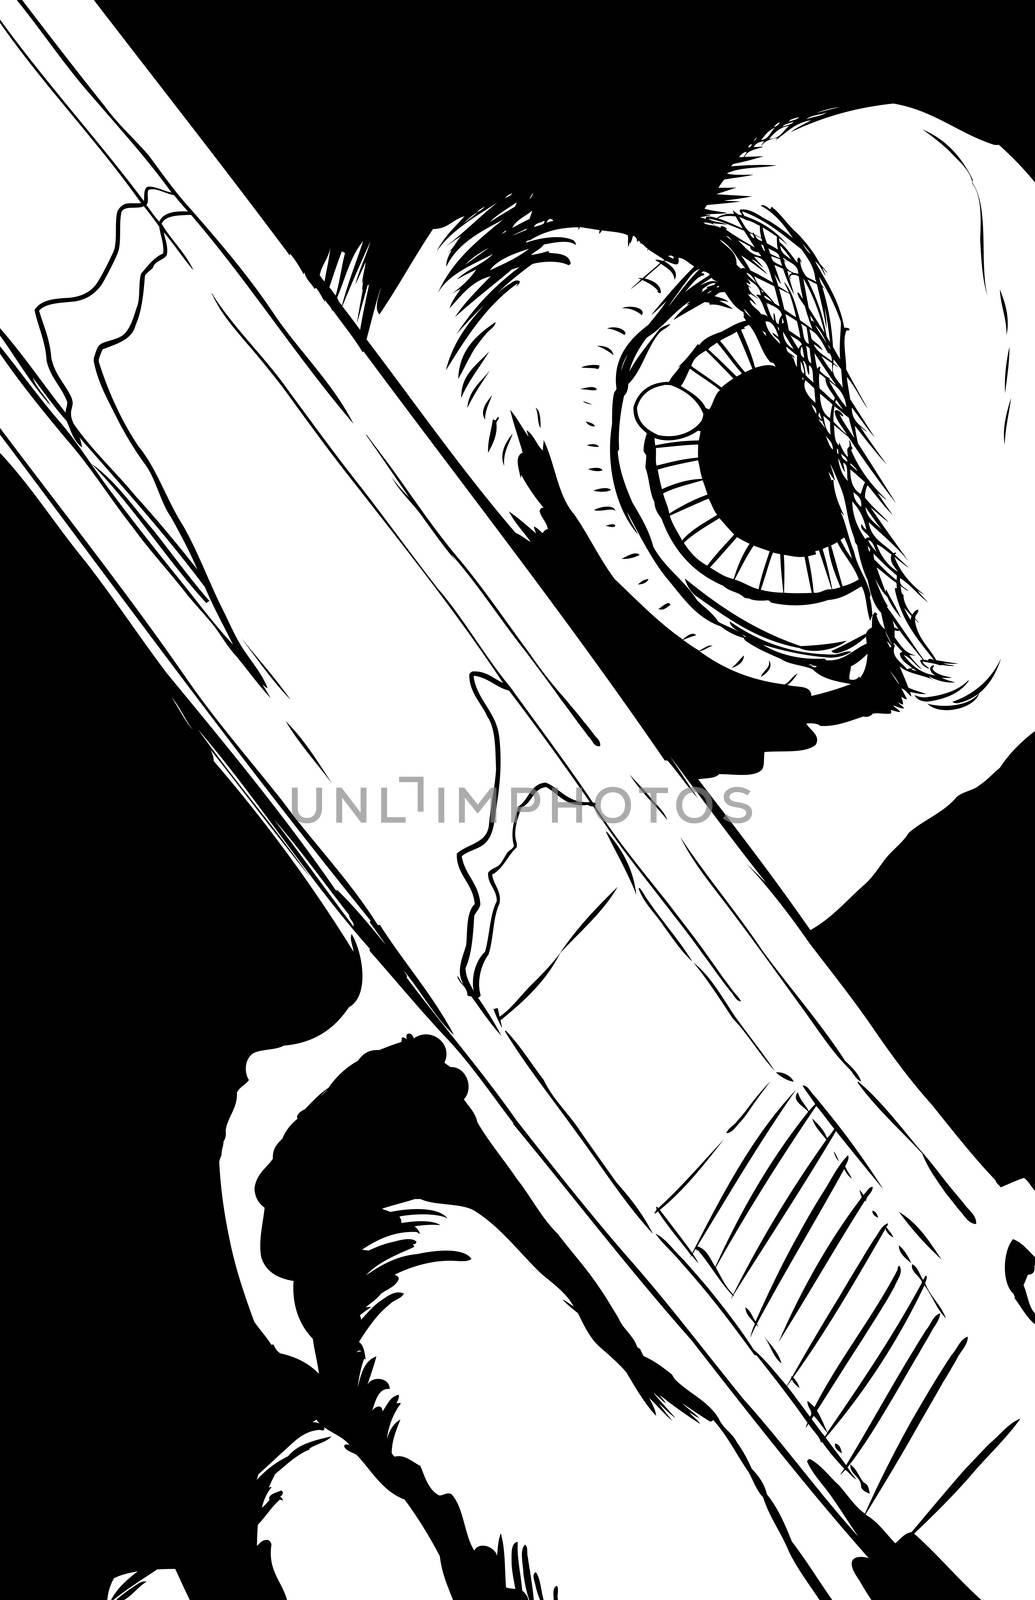 Outlined illustration of extreme close up on obscured face holding pistol under eye